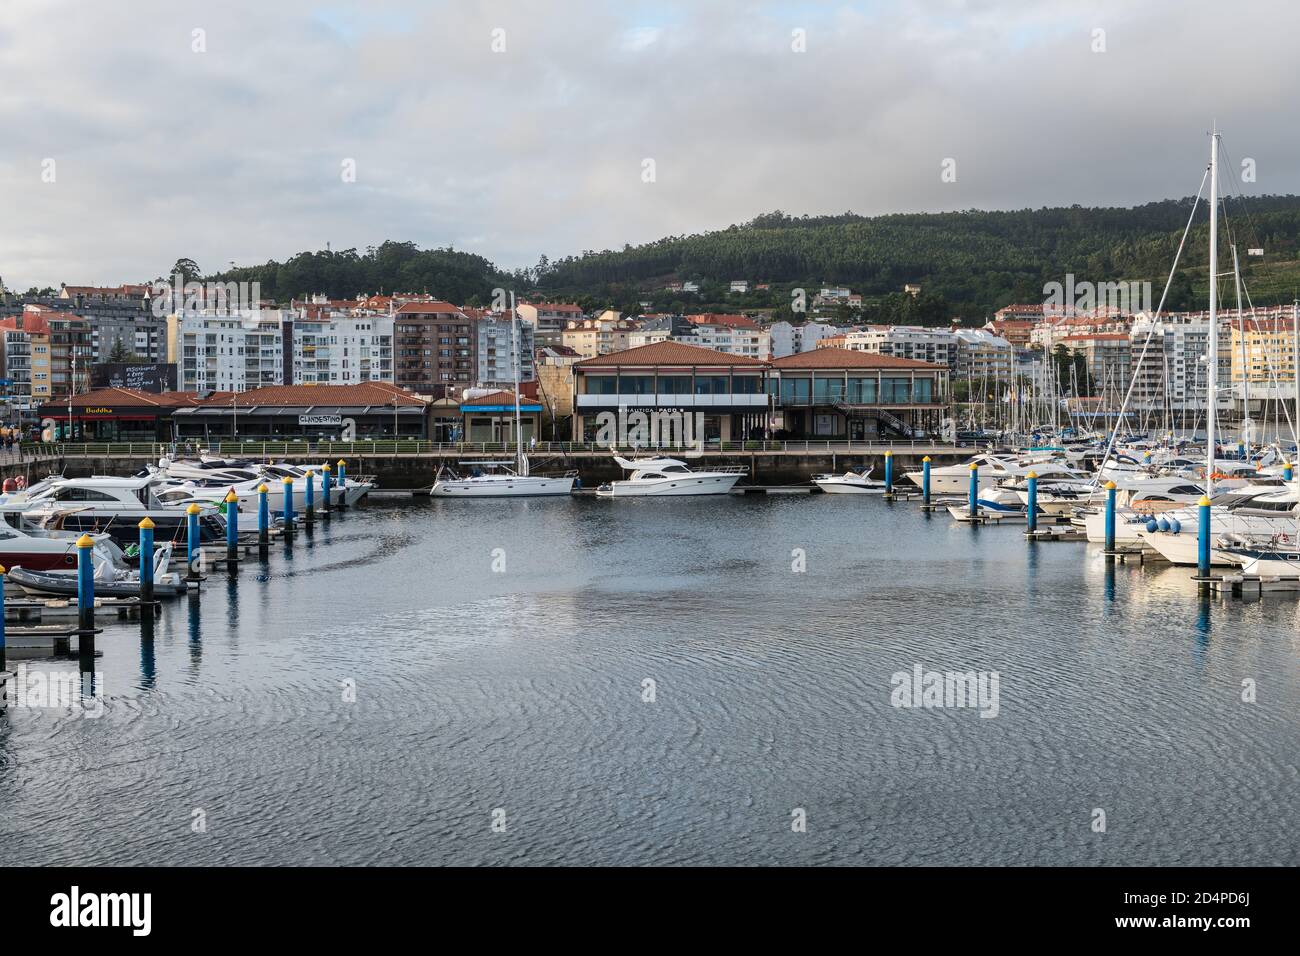 SANXENXO, SPAIN - AUGUST 18, 2020: Small sailing boats moored in the yacht club of Sanxenxo on a clear Summer day, Pontevedra, Spain. Stock Photo